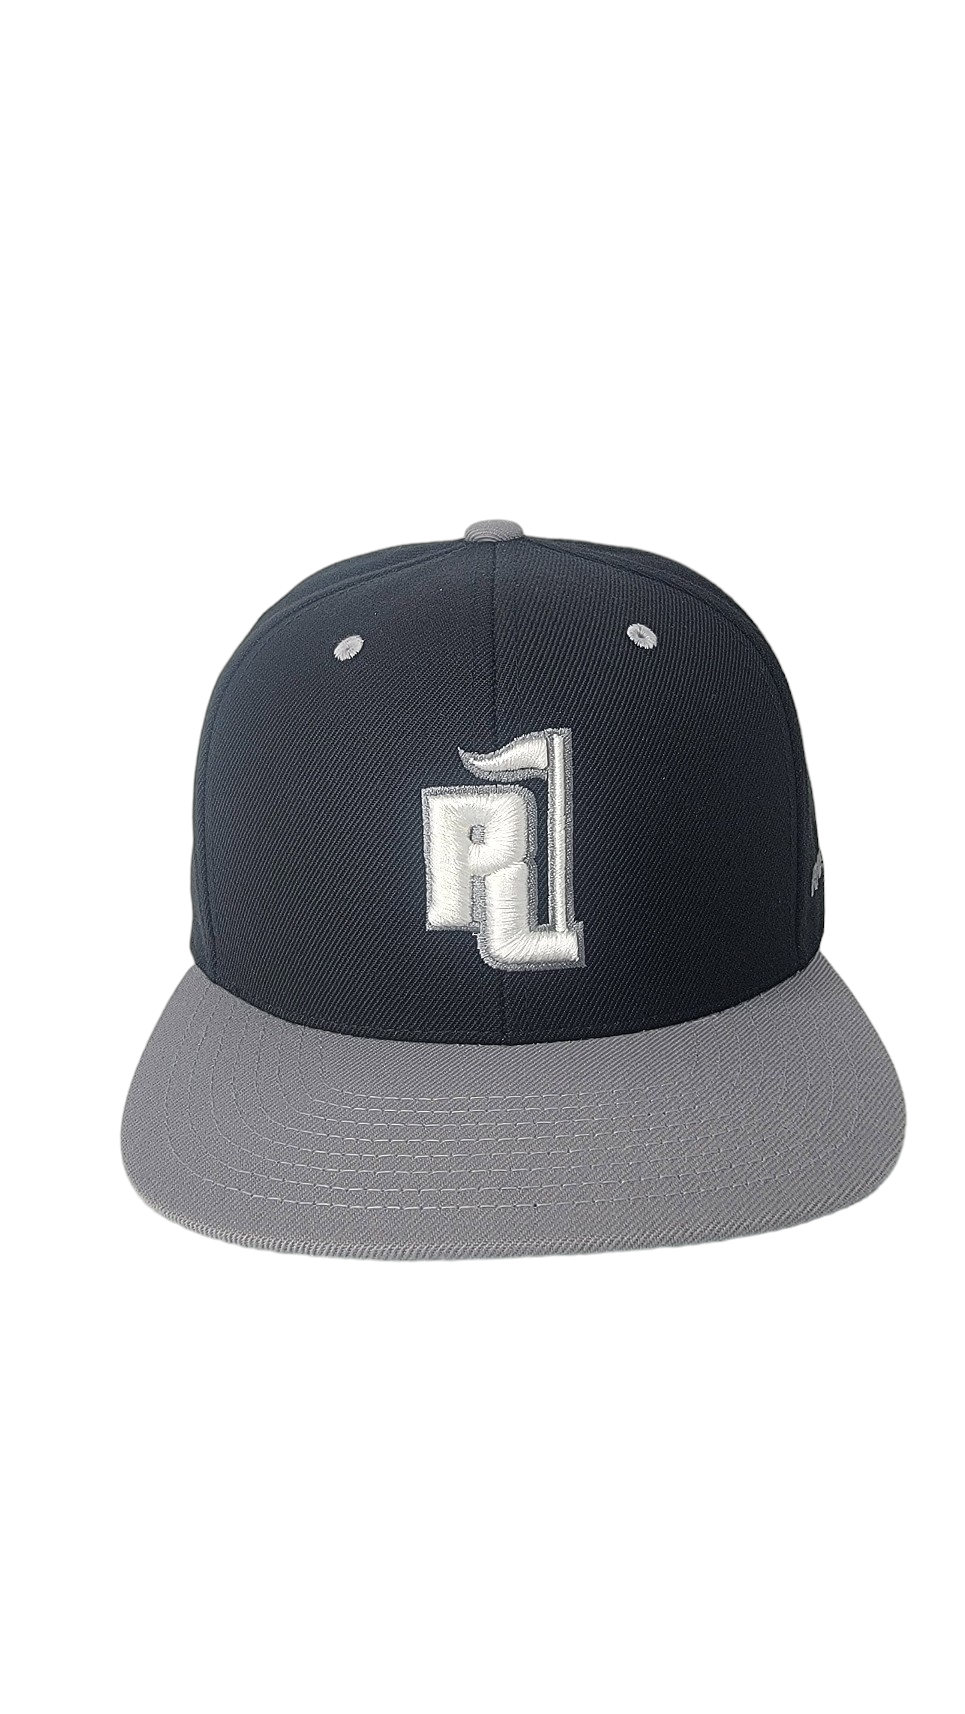 Raza Golf Black and Silver Snapback with White and Silver Logo